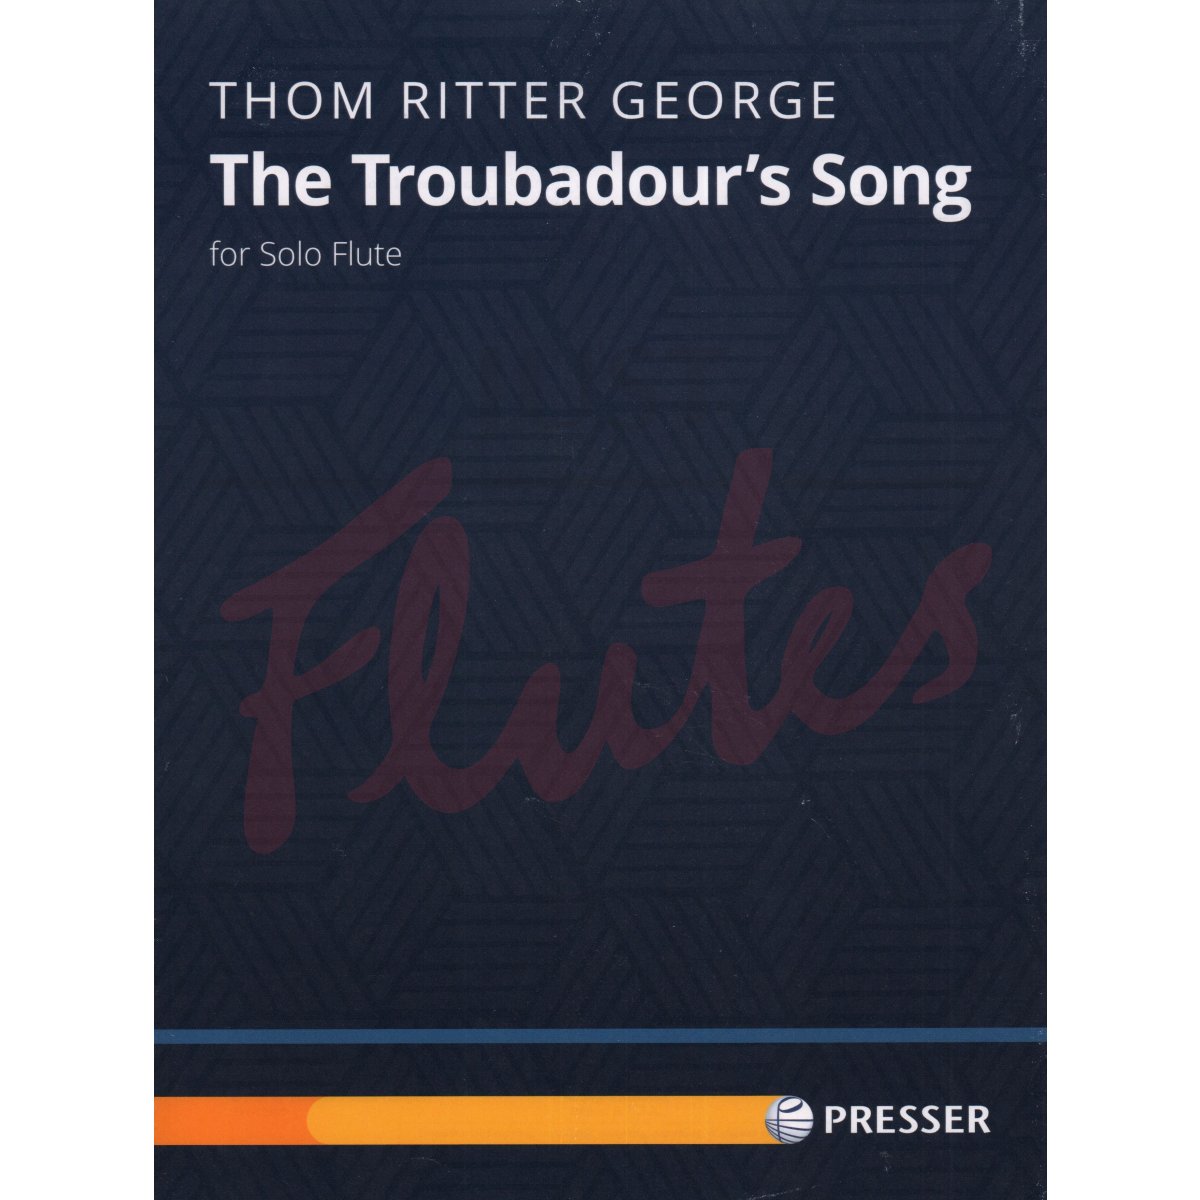 The Troubadour's Song for Solo Flute